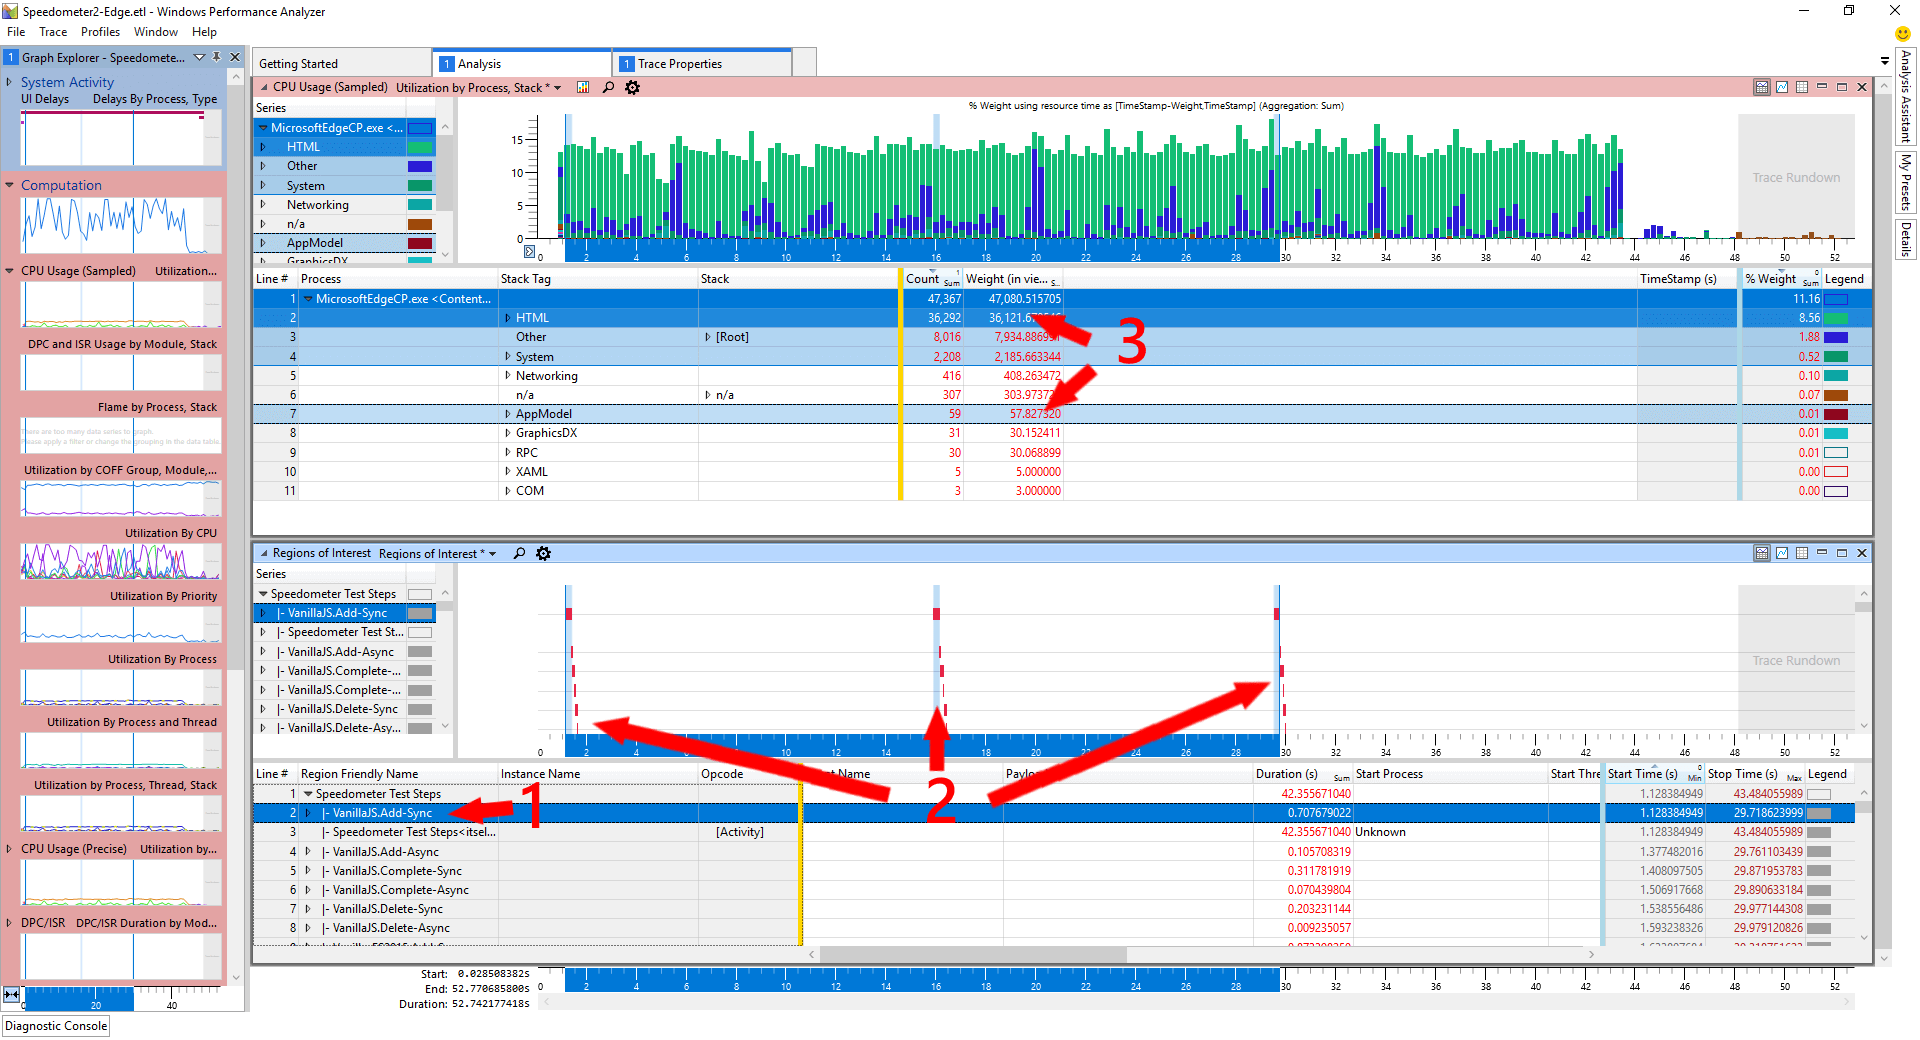 A single mark selected with the corresponding CPU chart highlighted in that same region